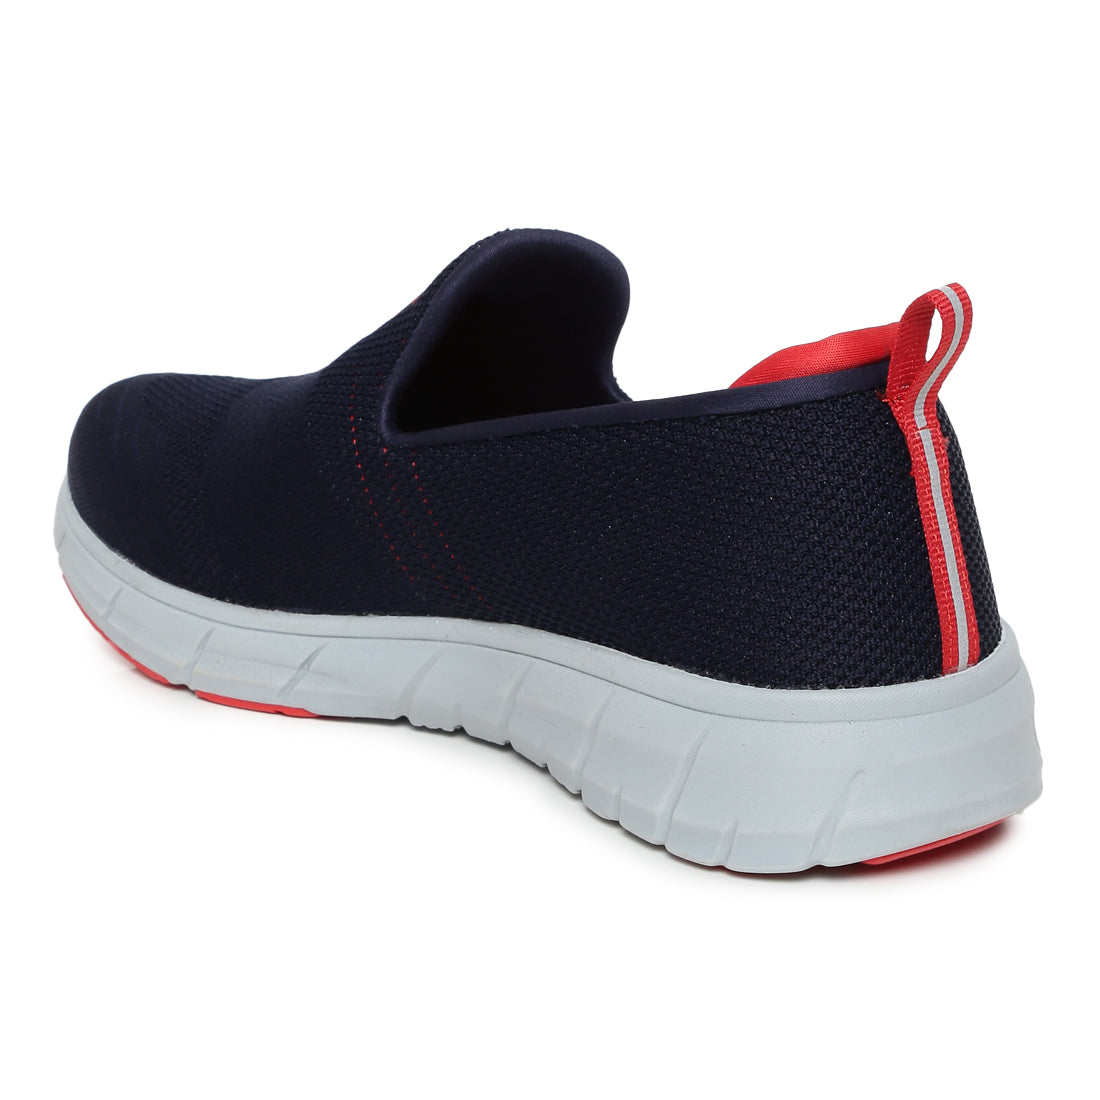 Eeken Blue - Red Athleisure Shoes for Men